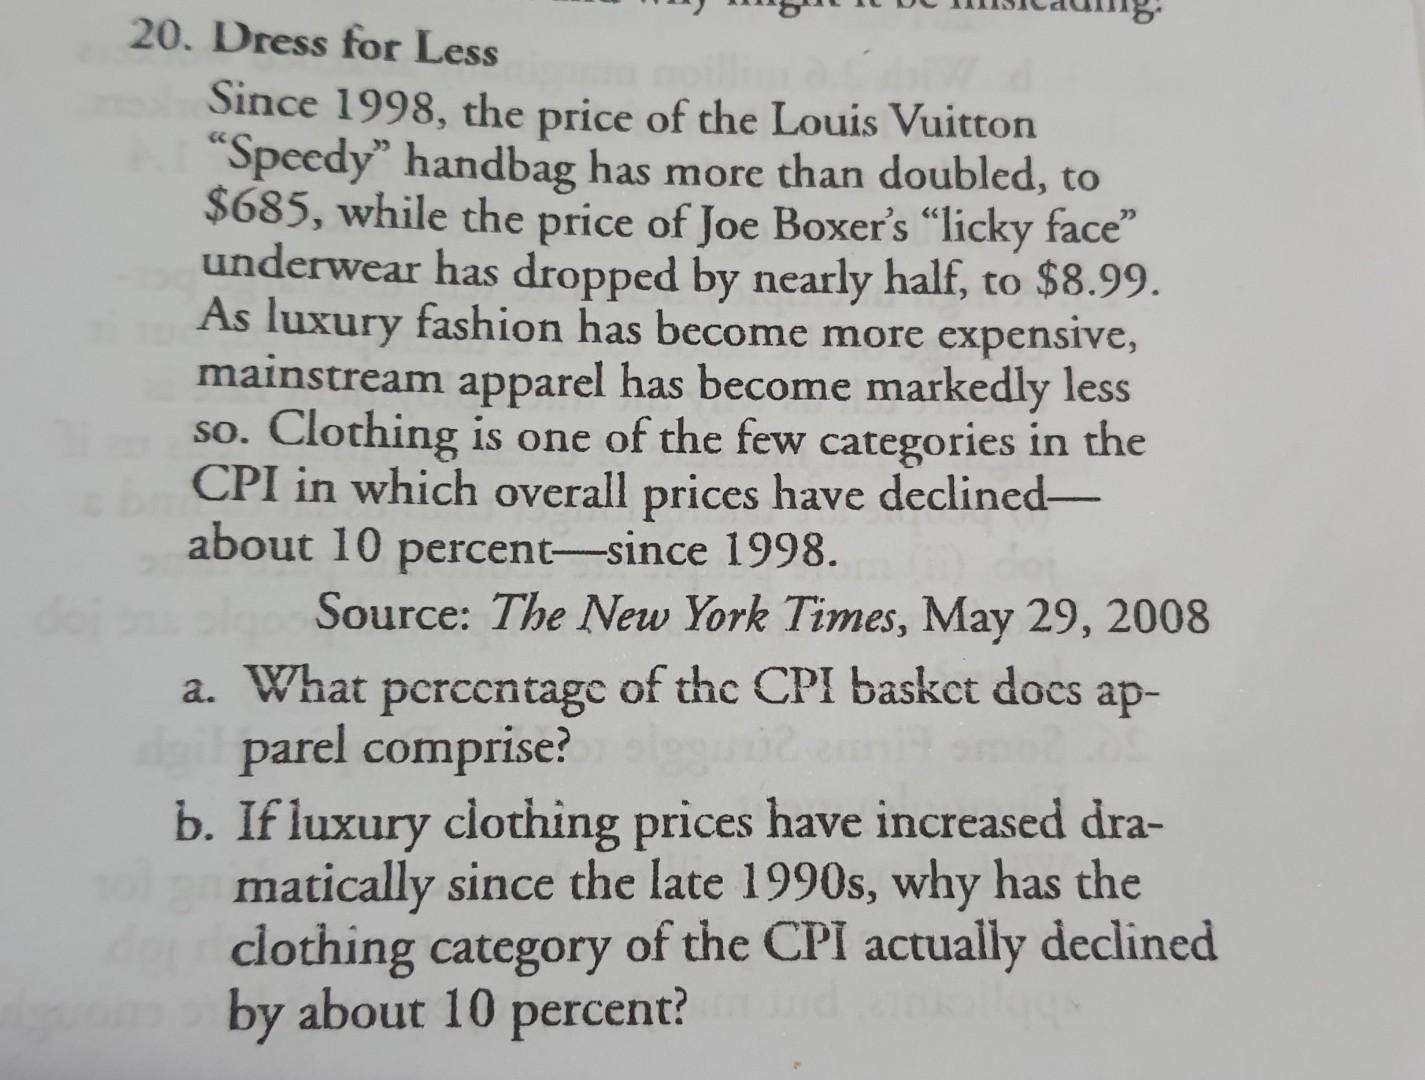 Solved Since 1998, the price of the Louis Vuitton Speedy